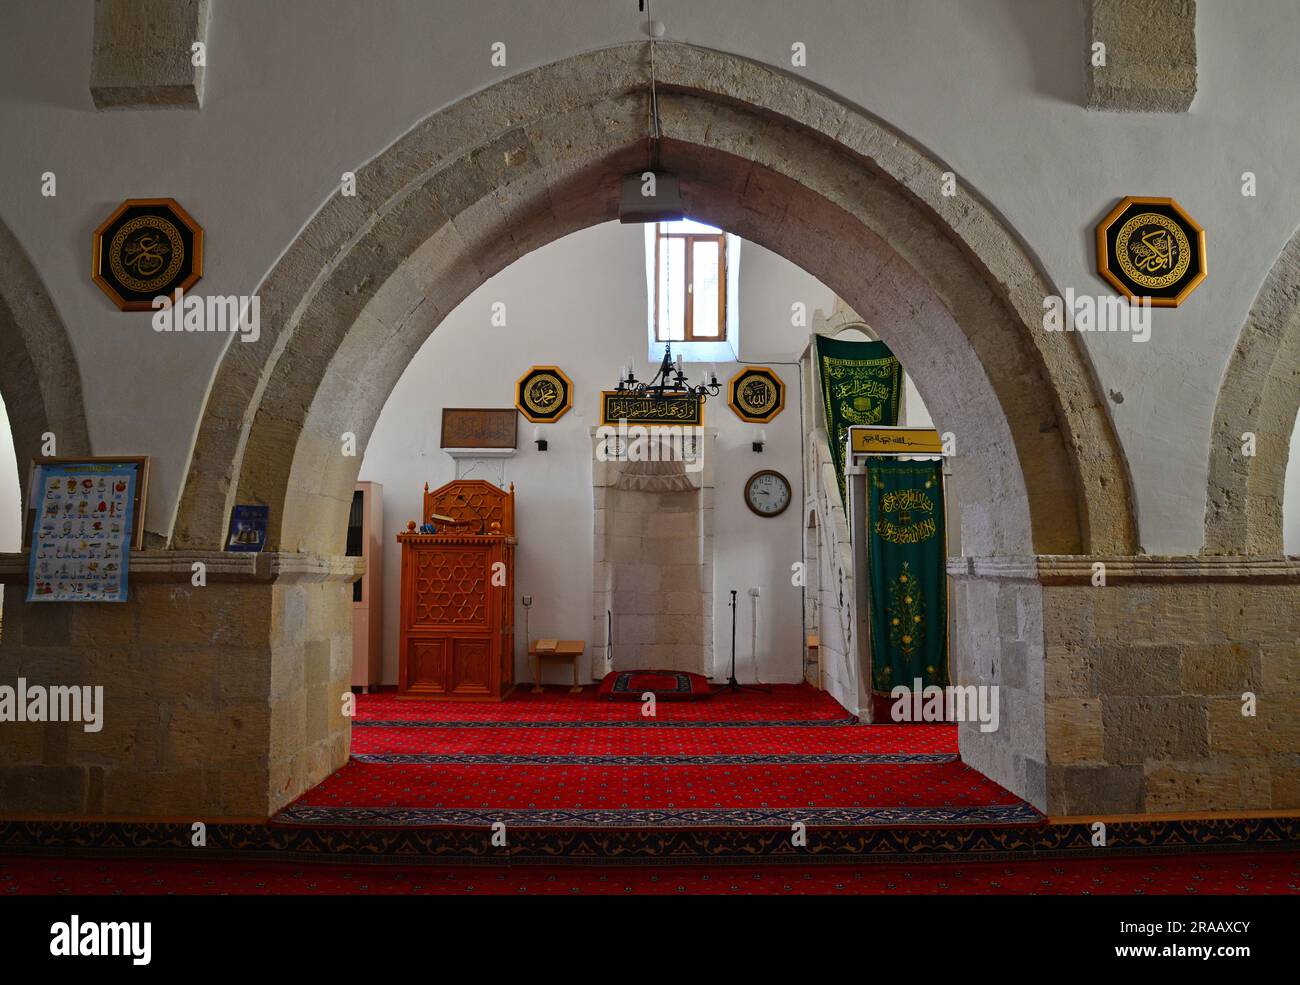 Located in Tunceli, Turkey, the Suleymaniye Mosque was built in the 16th century. Stock Photo